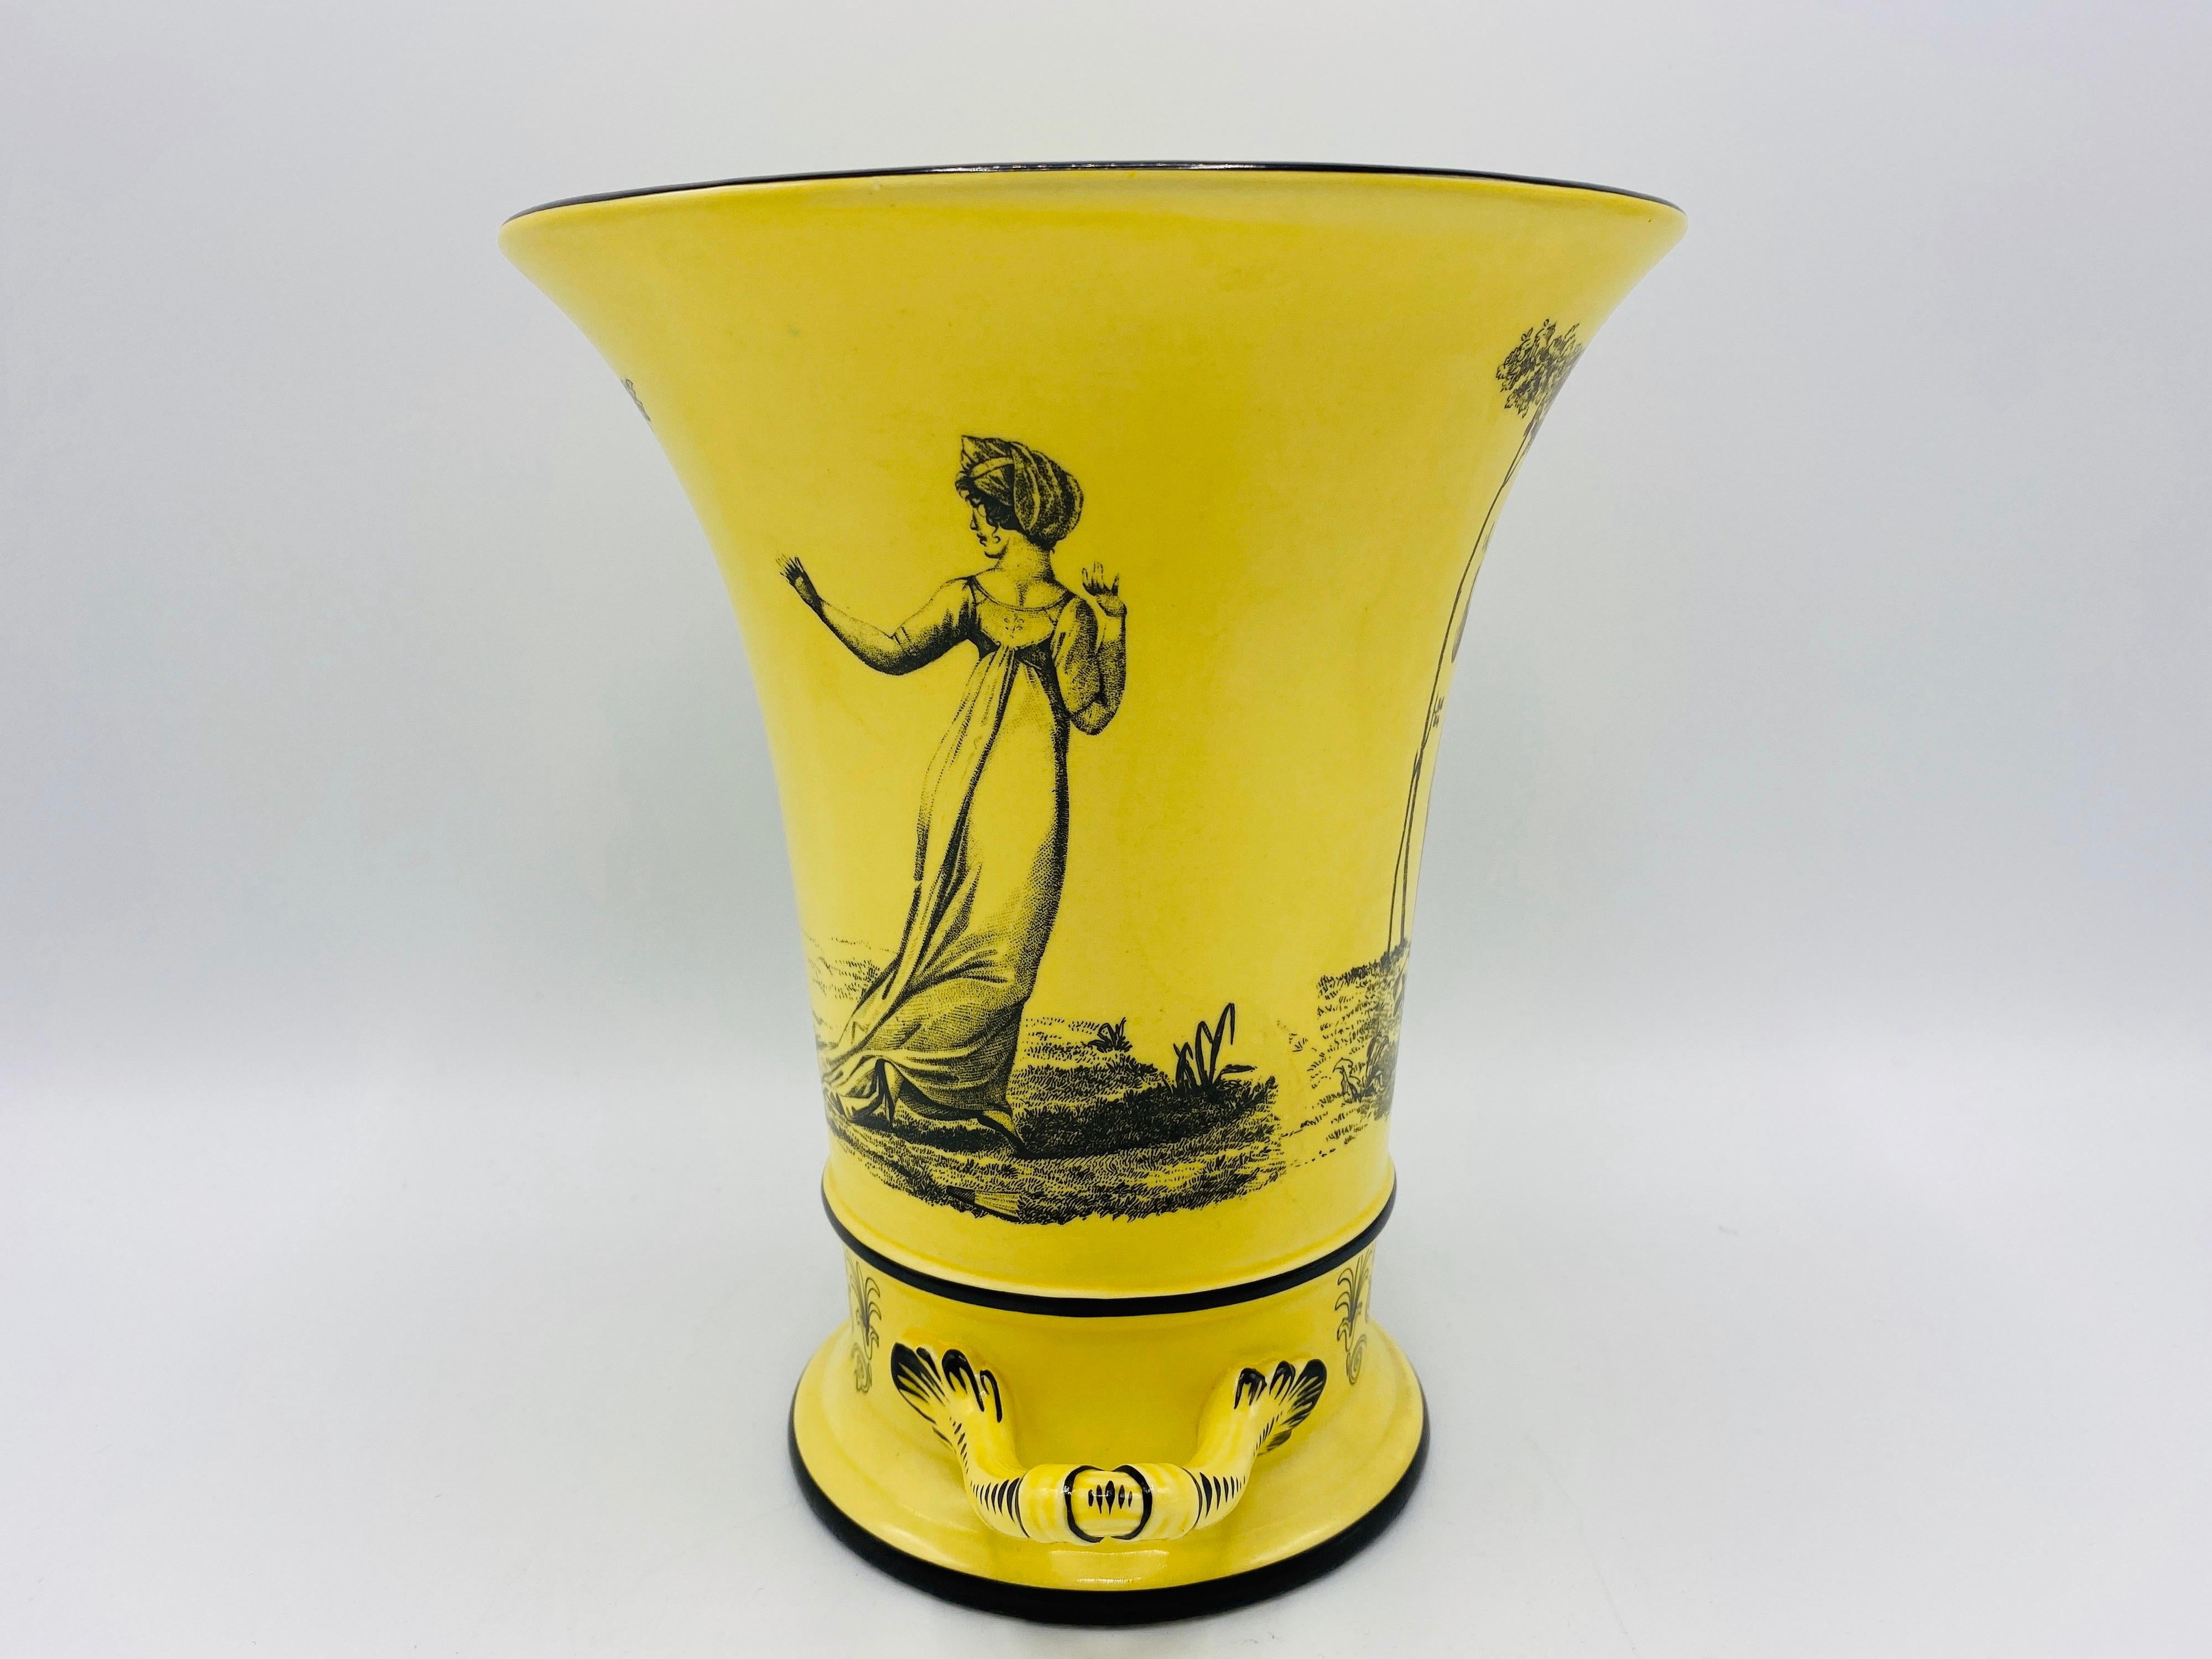 Italian Mottahedeh Yellow and Black Toile Handled Urn Vases, Pair, 1960s For Sale 3